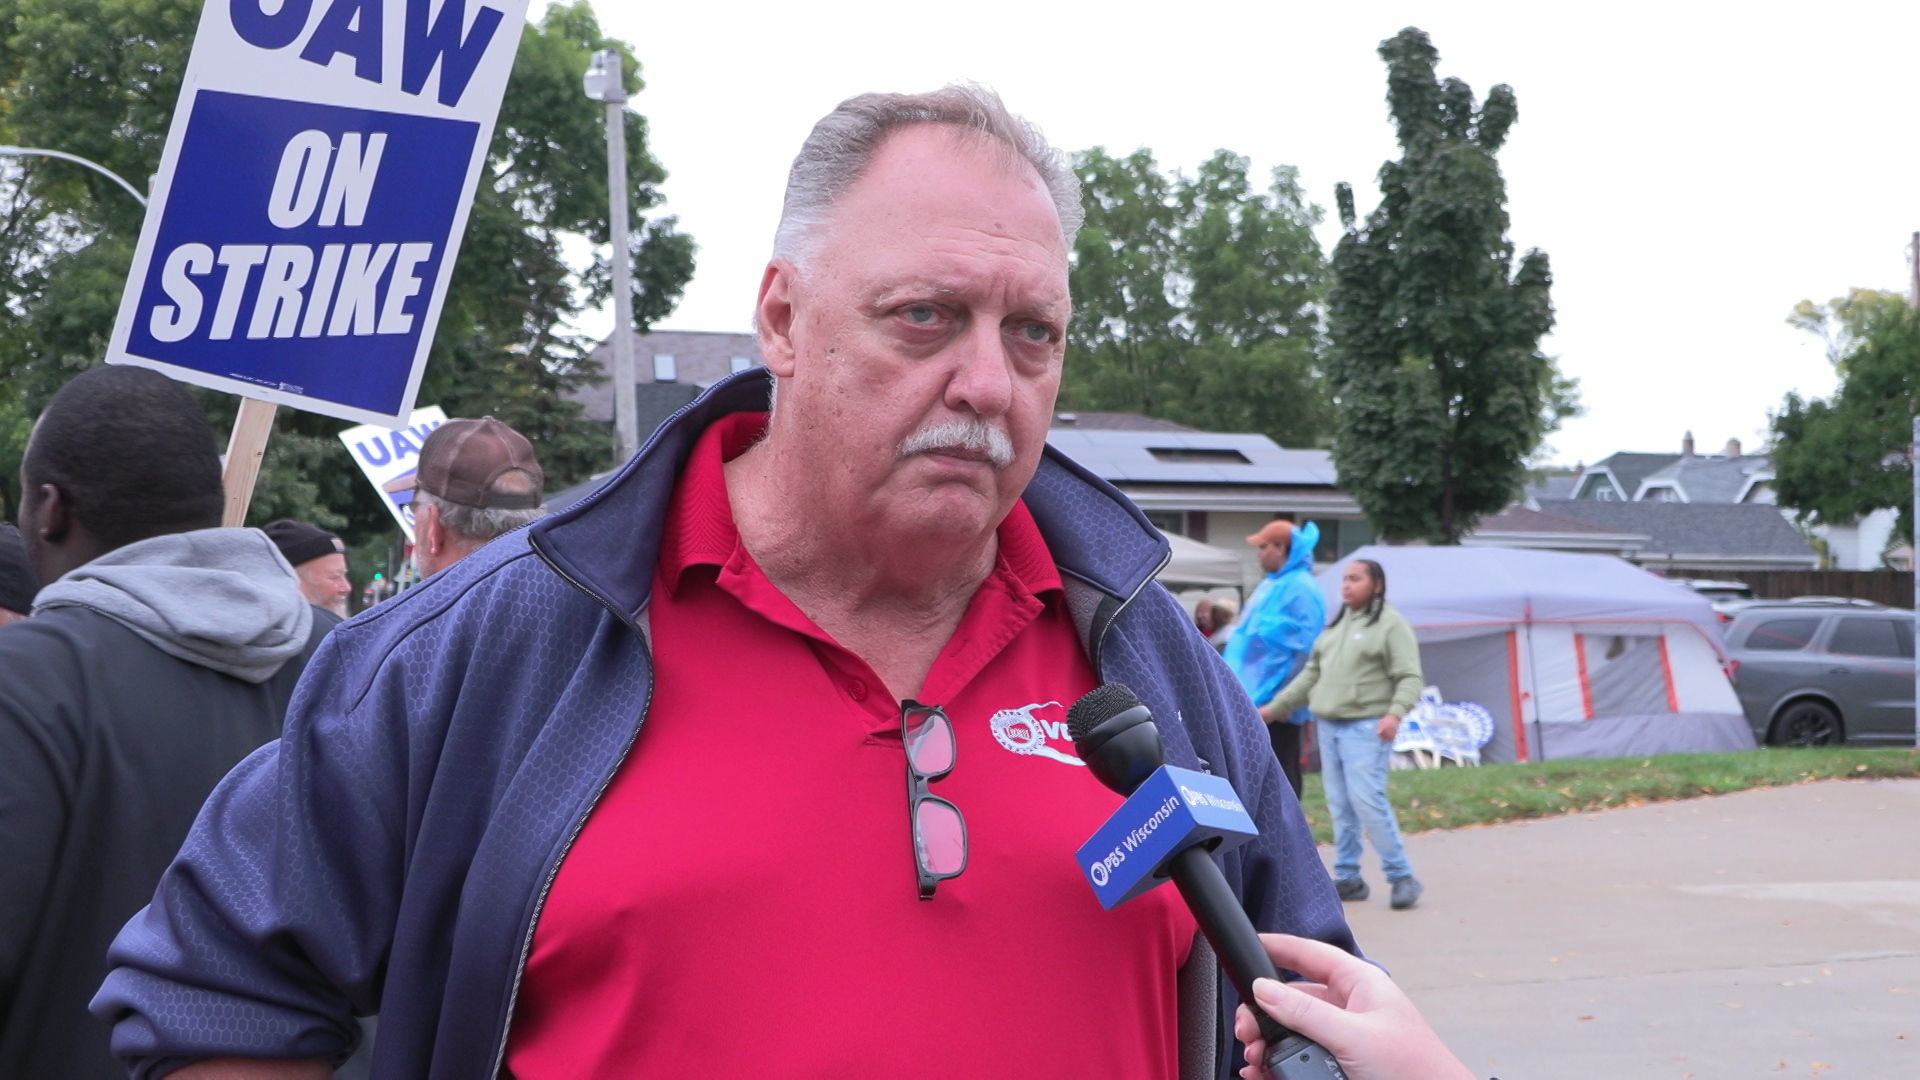 Joe Neu speaks into a microphone with a PBS Wisconsin flag while standing outside, with other people standing behind him with picket signs reading "UAW On Strike," with a tent, vehicles and houses in the background.